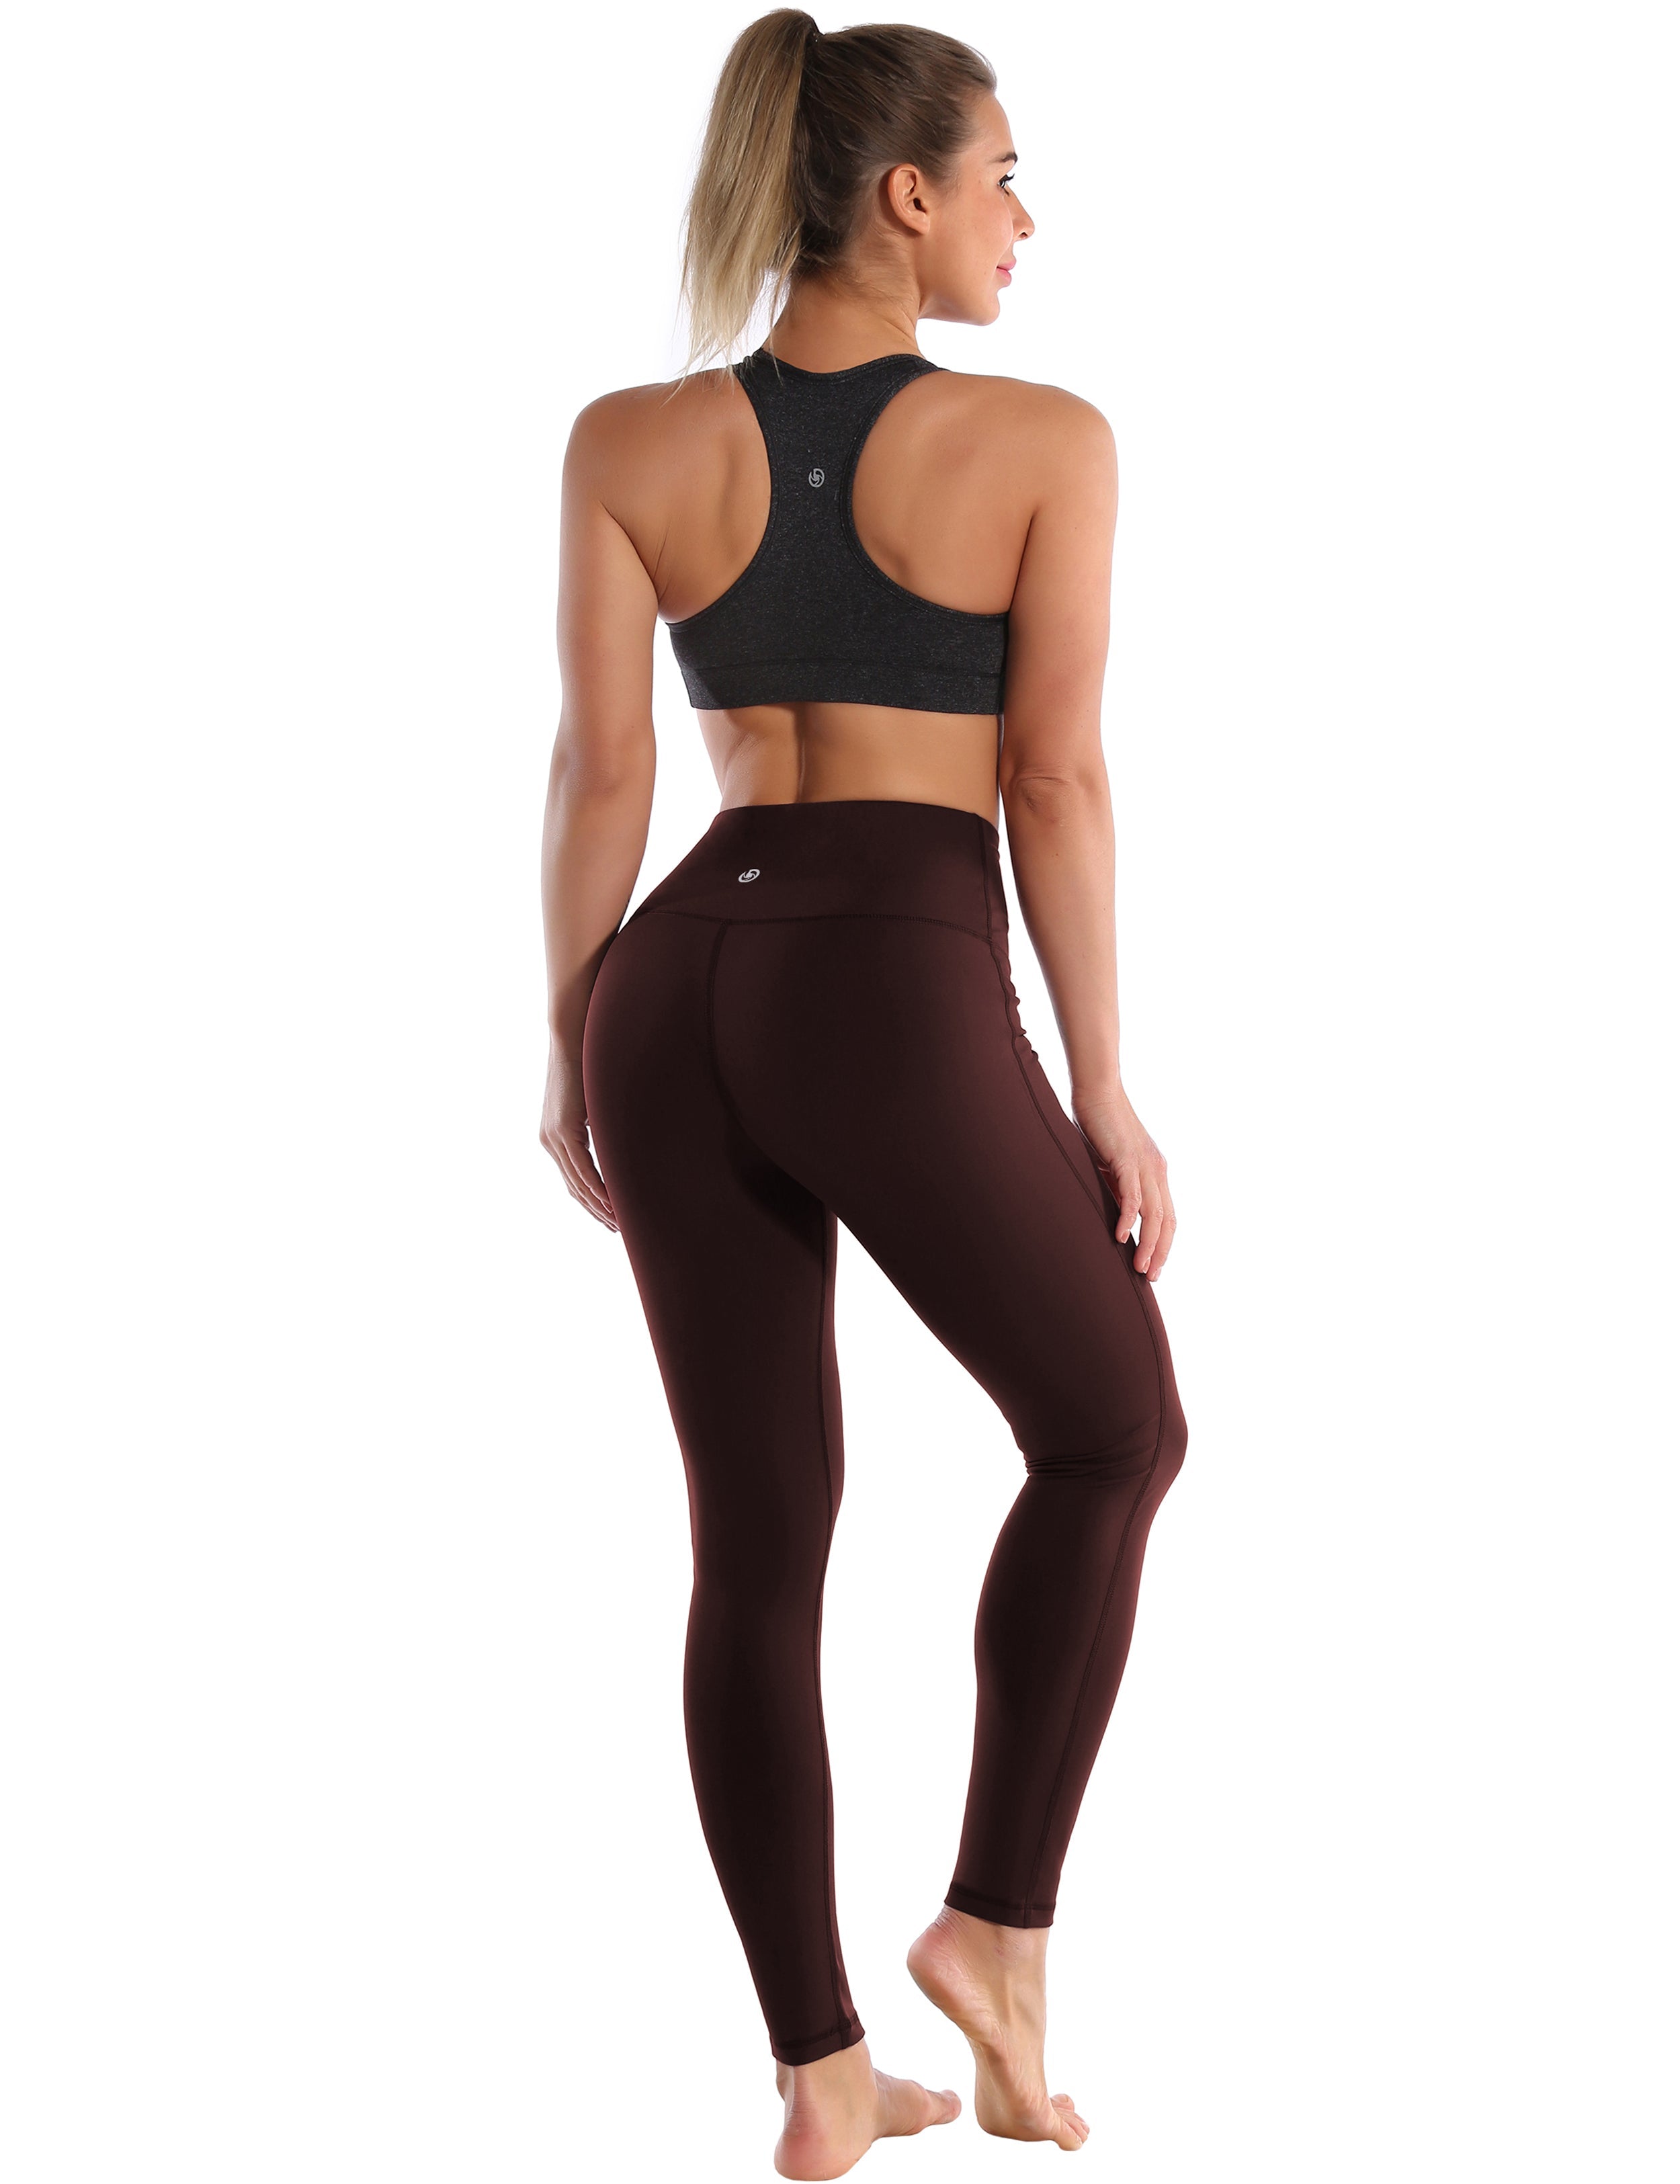 High Waist Side Line Jogging Pants mahoganymaroon Side Line is Make Your Legs Look Longer and Thinner 75%Nylon/25%Spandex Fabric doesn't attract lint easily 4-way stretch No see-through Moisture-wicking Tummy control Inner pocket Two lengths